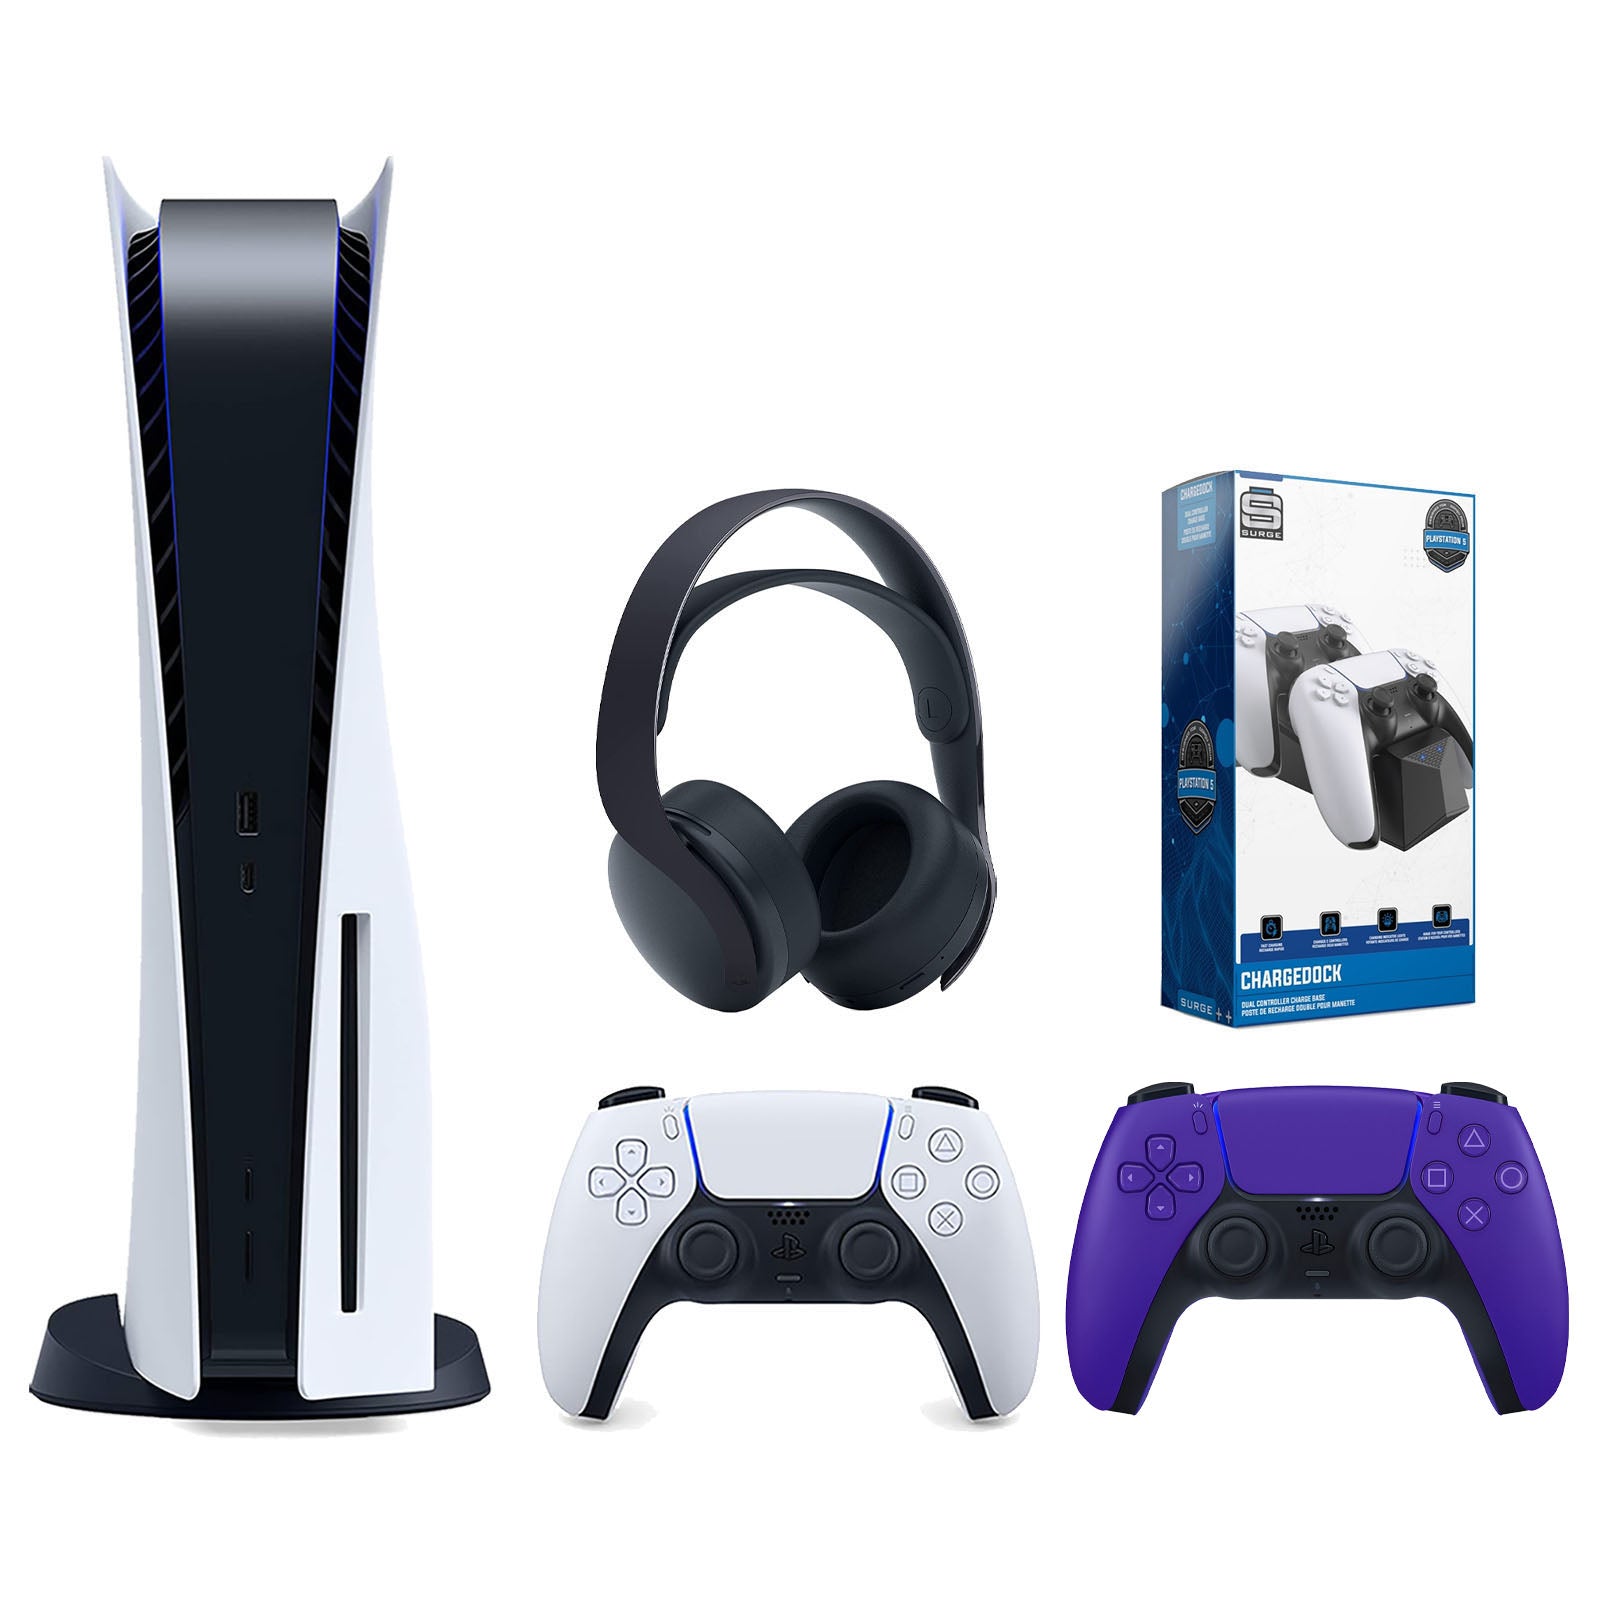 Sony Playstation 5 Disc Version Console with Extra Purple Controller, Black PULSE 3D Headset and Surge Dual Controller Charge Dock Bundle - Pro-Distributing